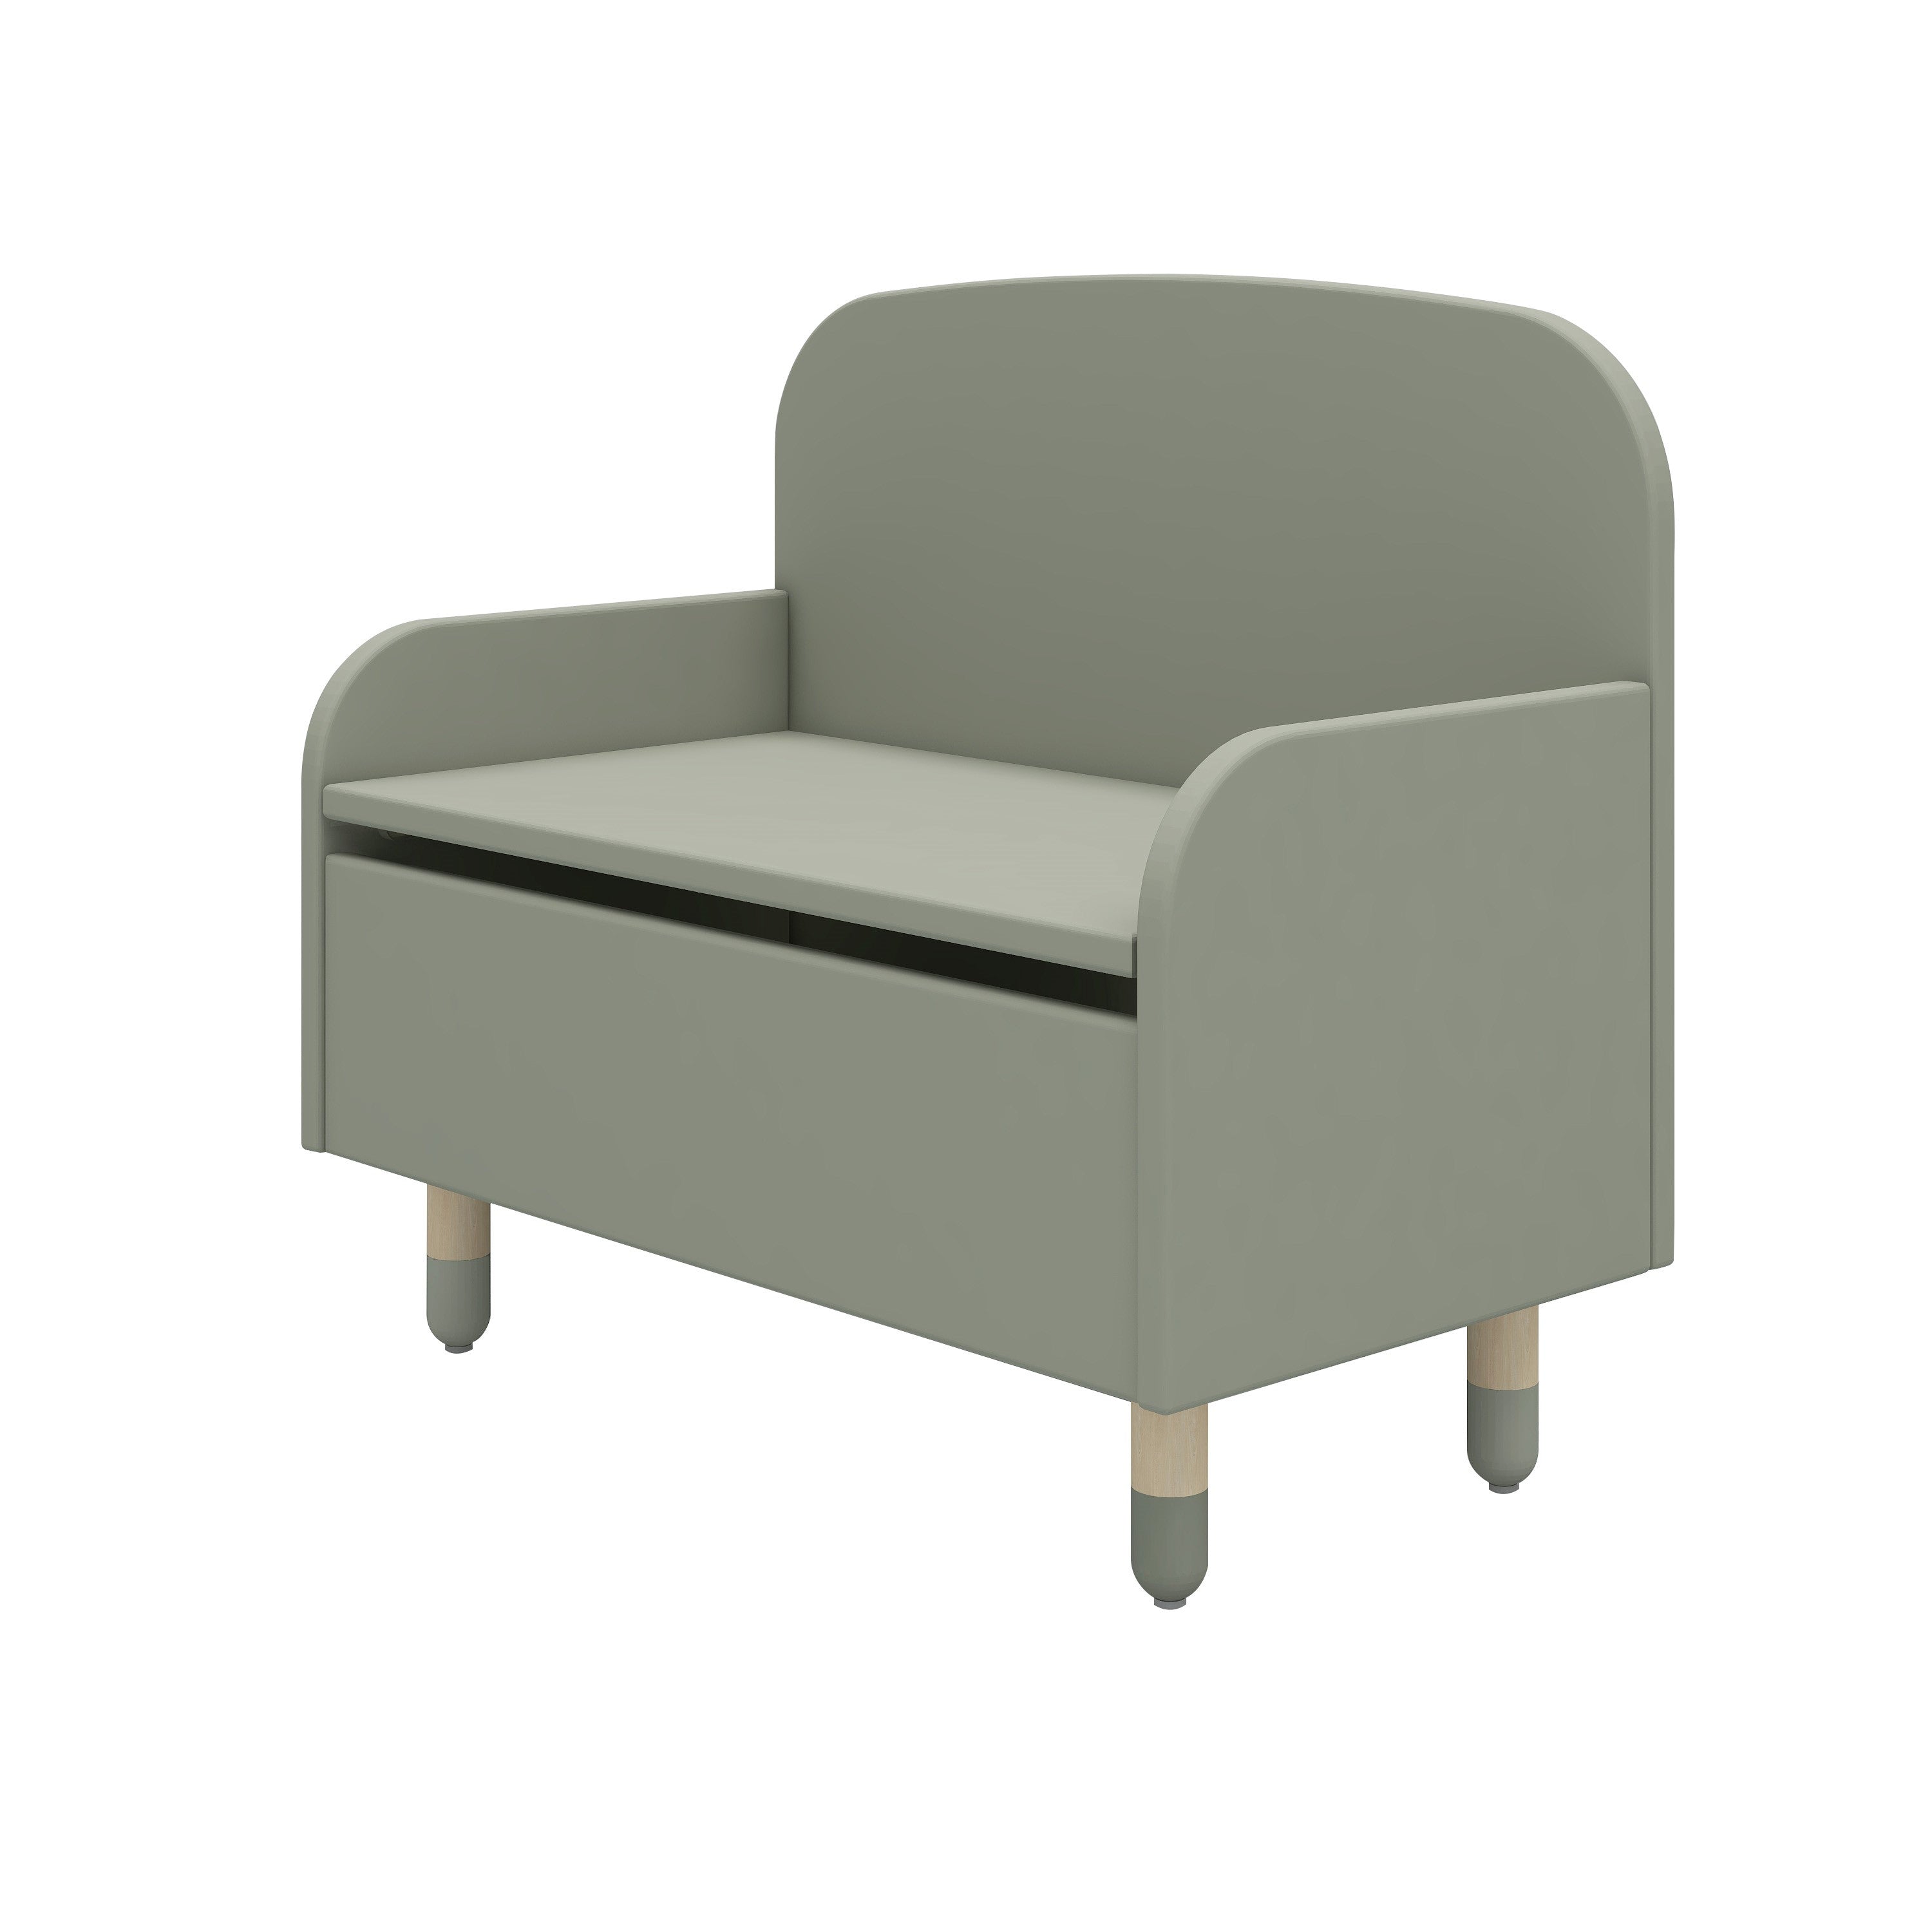 Flexa Dots Storage Bench with Back Rest in Natural Green